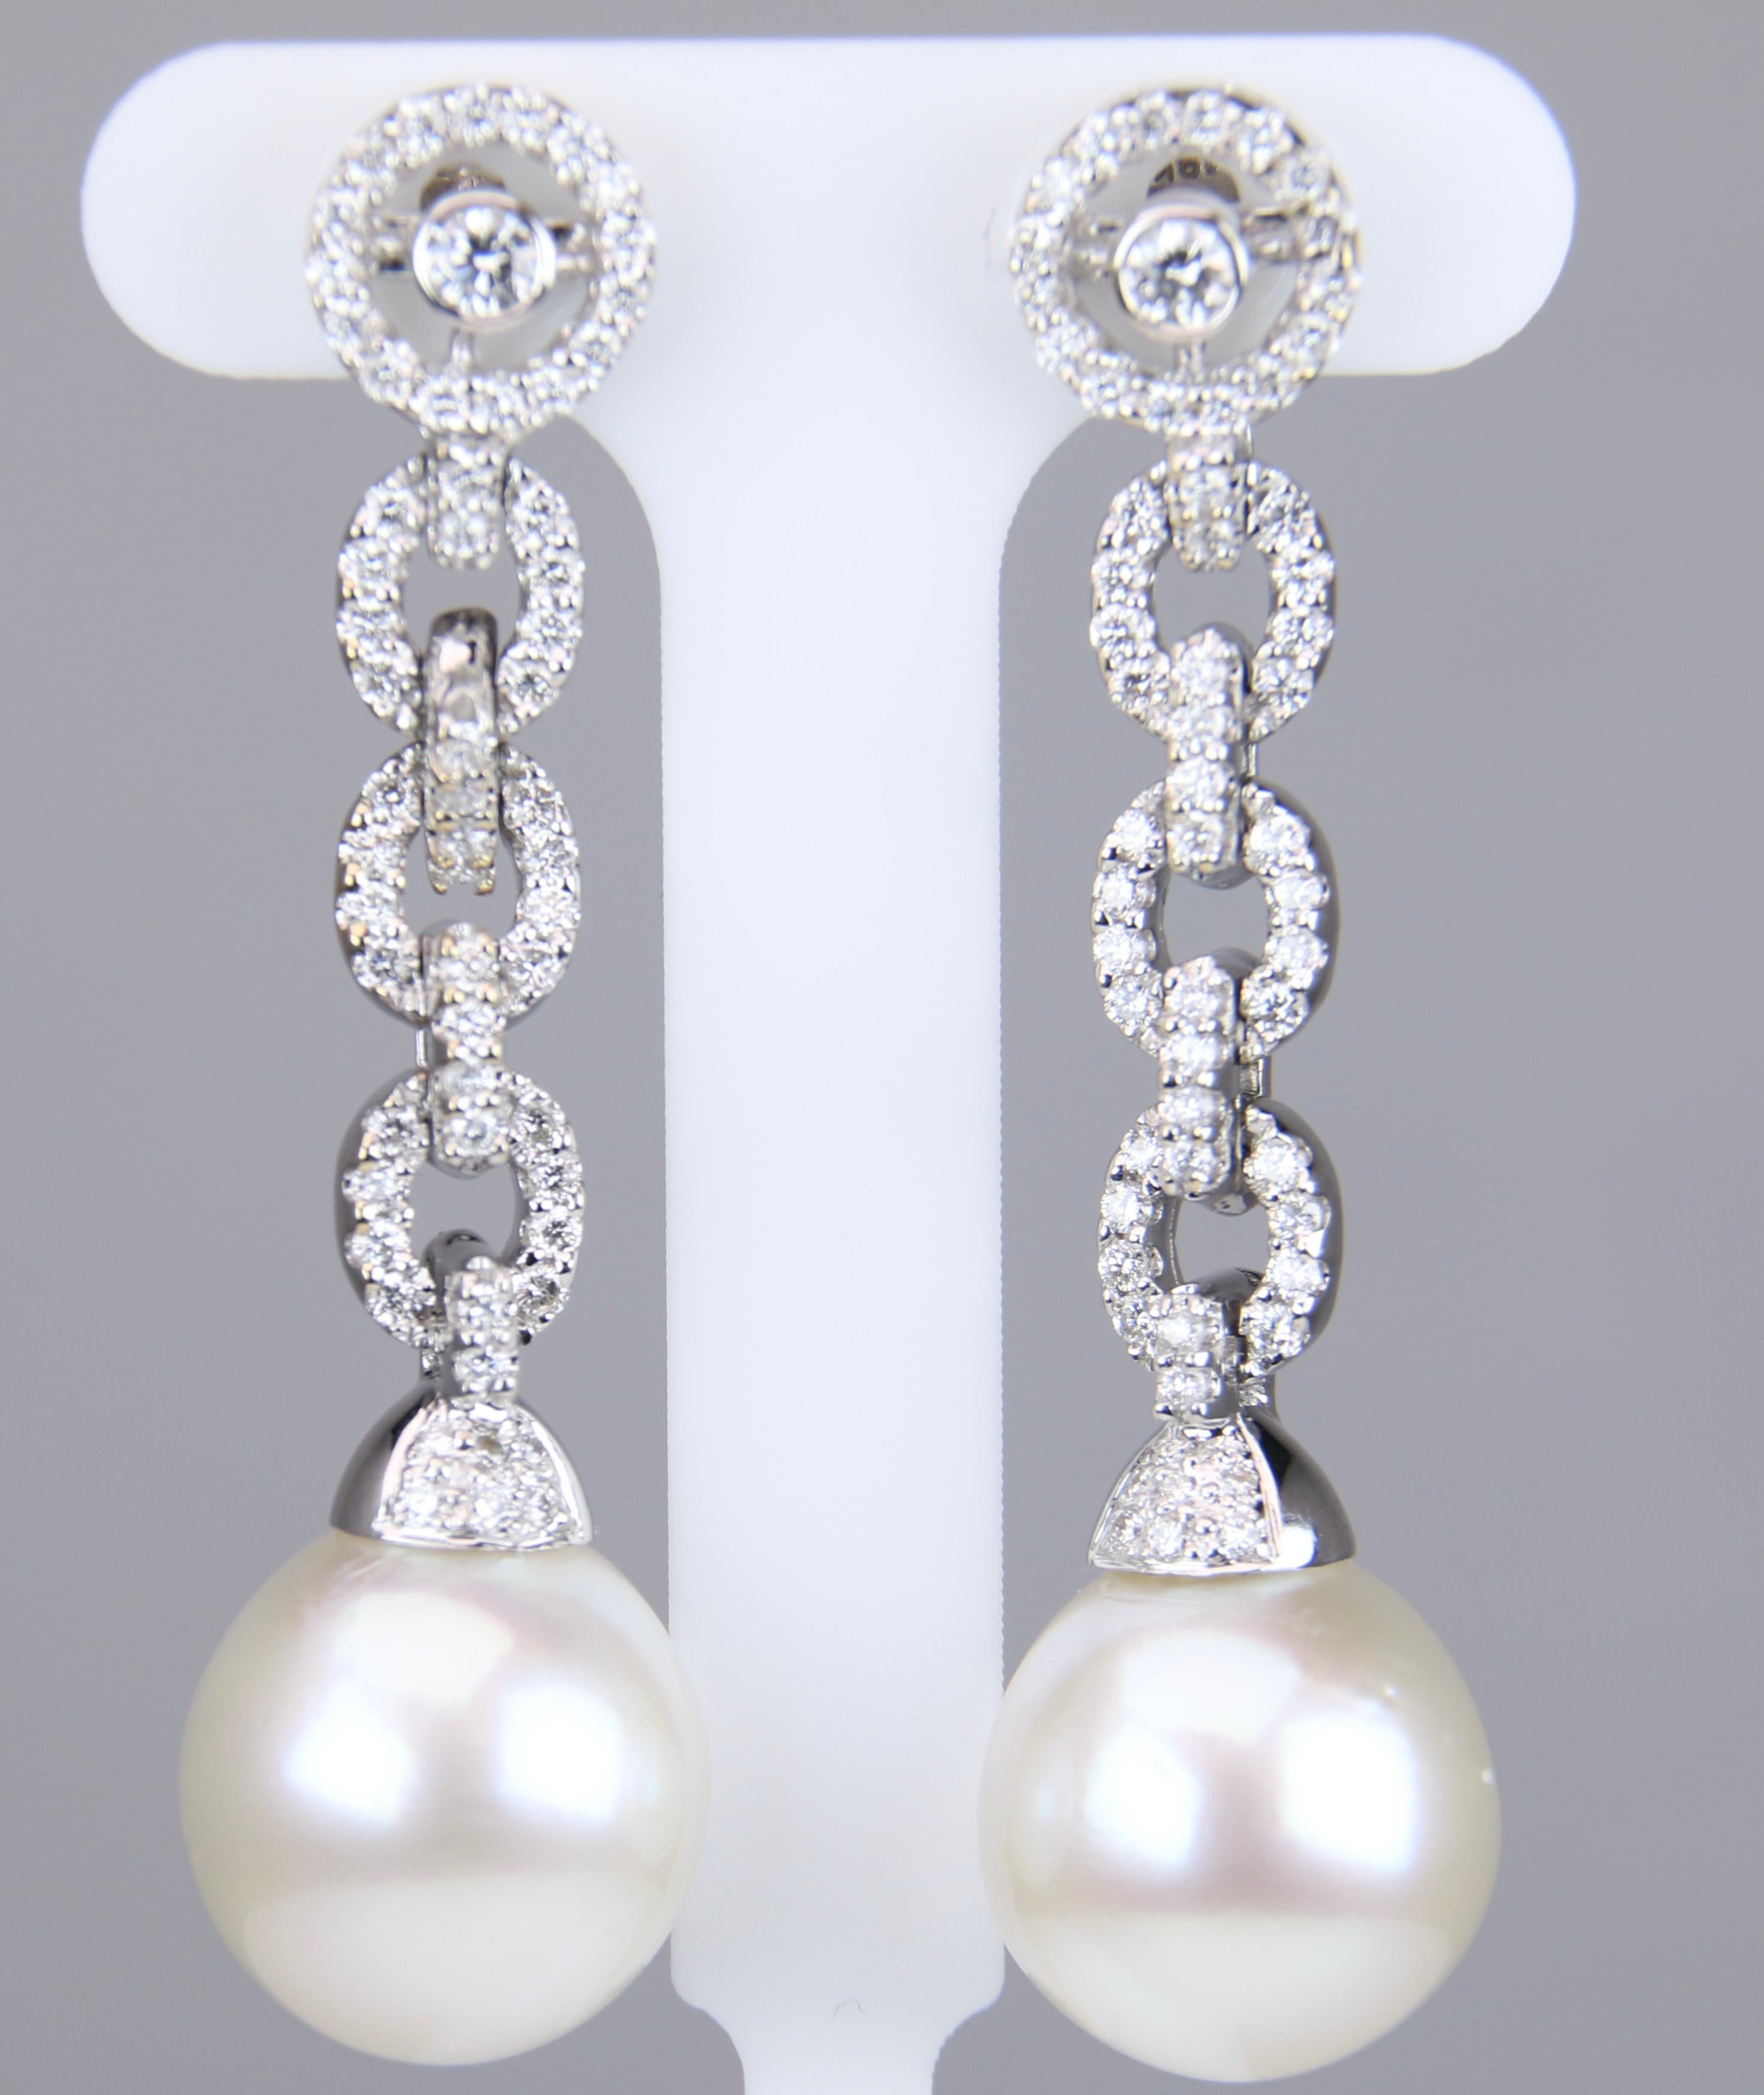 18 karat white gold South Sea pearl posts earrings.  The earrings feature 12.3mm white south sea pearls, AA quality. There are .98 carat total weight of round brilliant cut diamonds, G in color and SI1-2 in clarity.  The earrings are 1.75